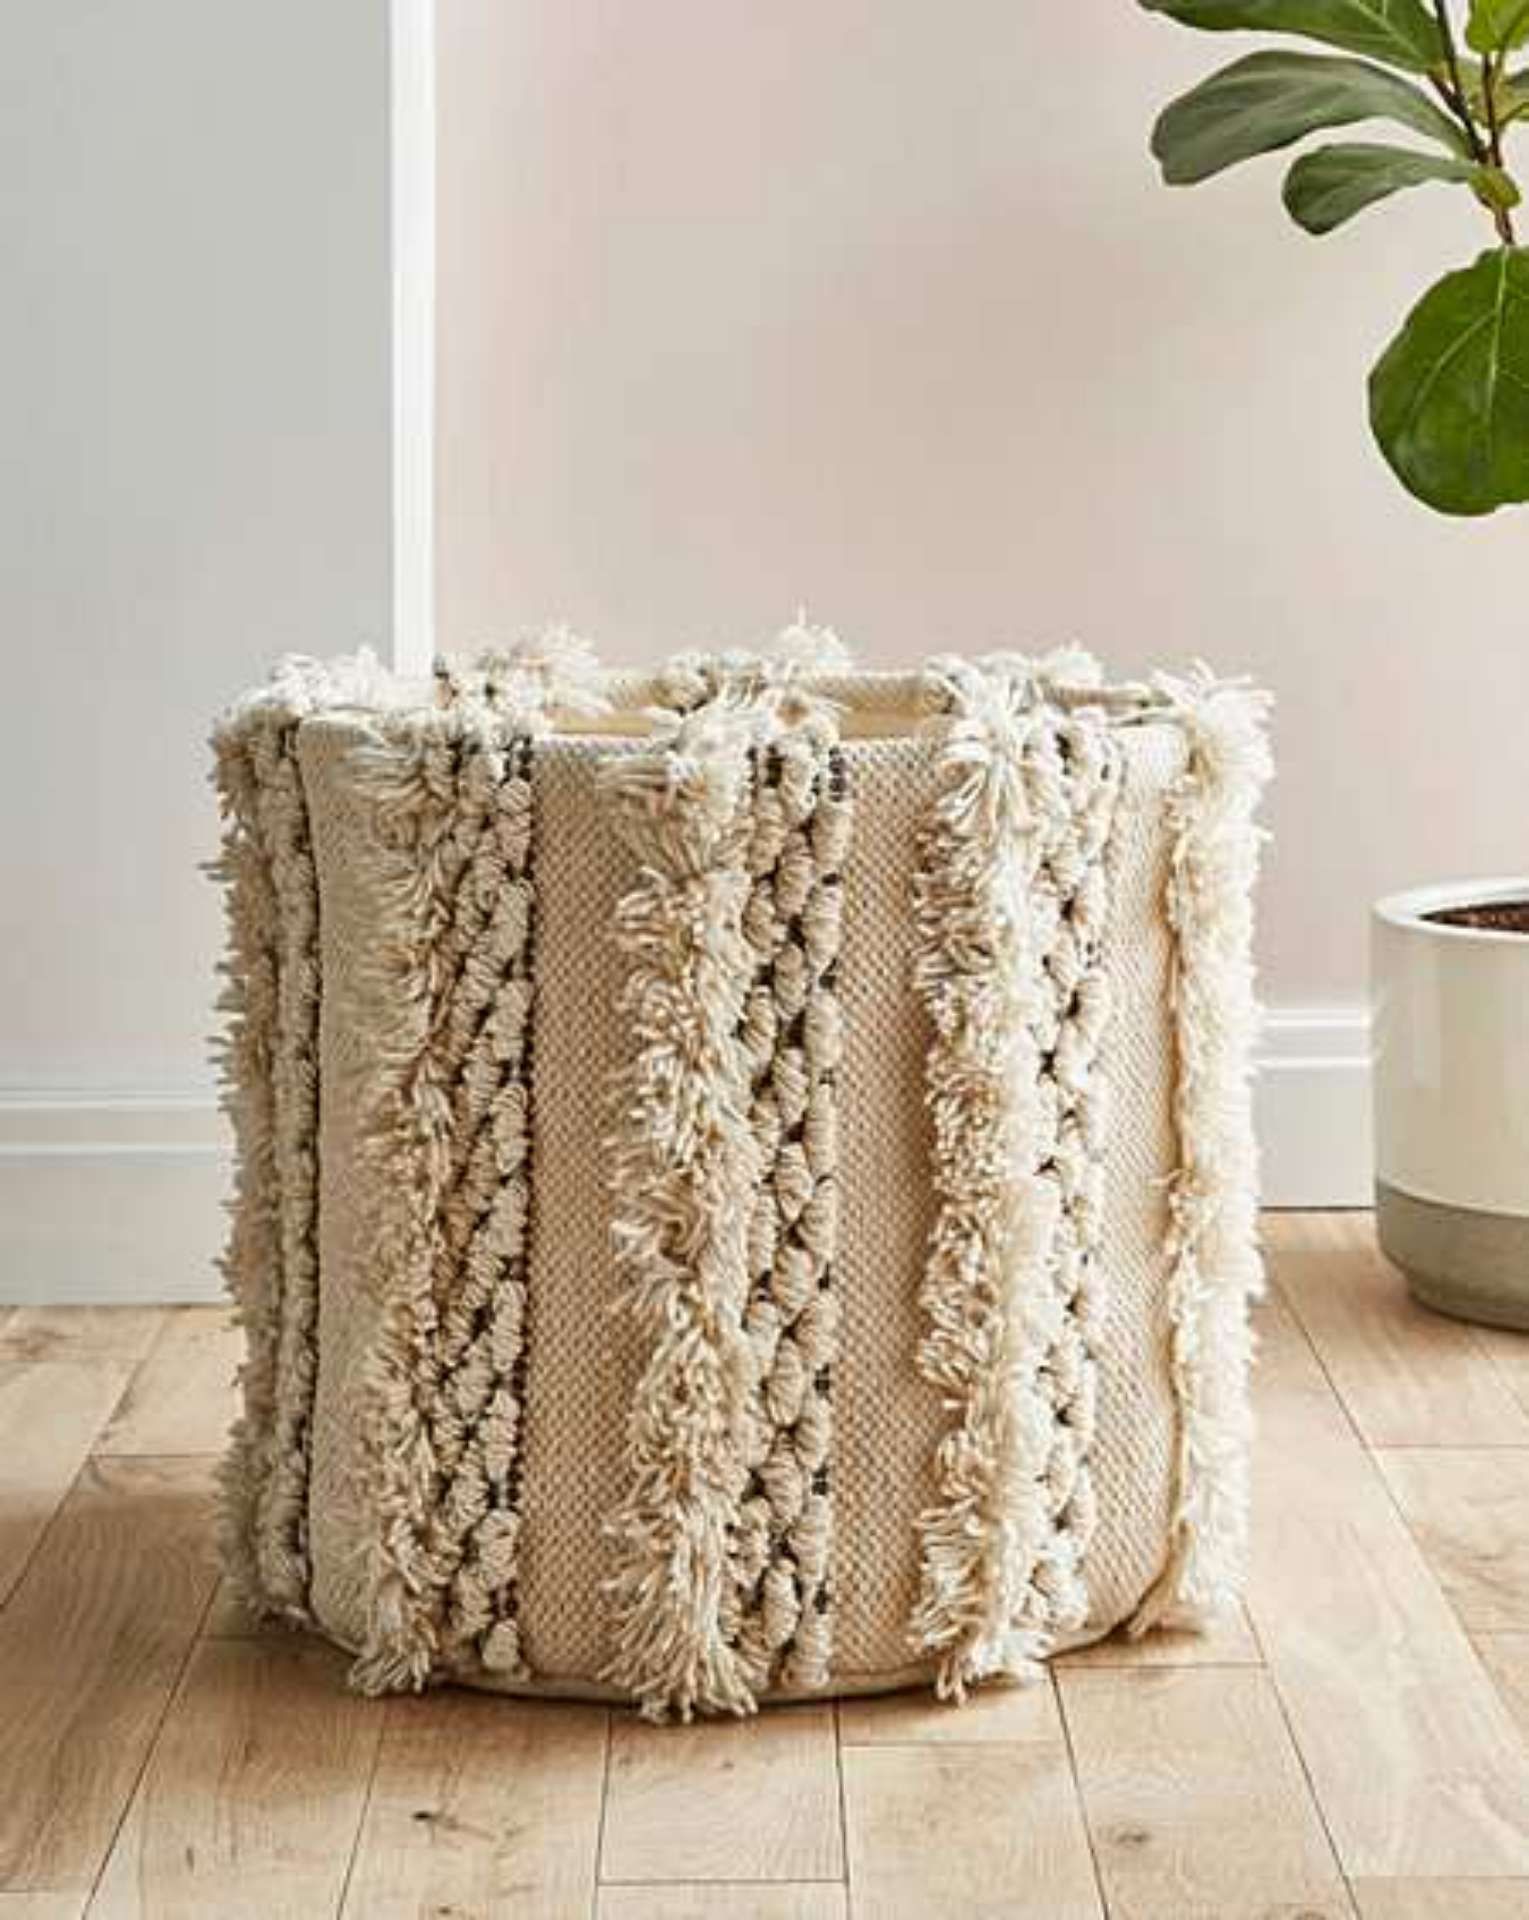 4x BRAND NEW Embroidered Storage Basket. RRP £39 EACH. An attractive way to keep a space neat and